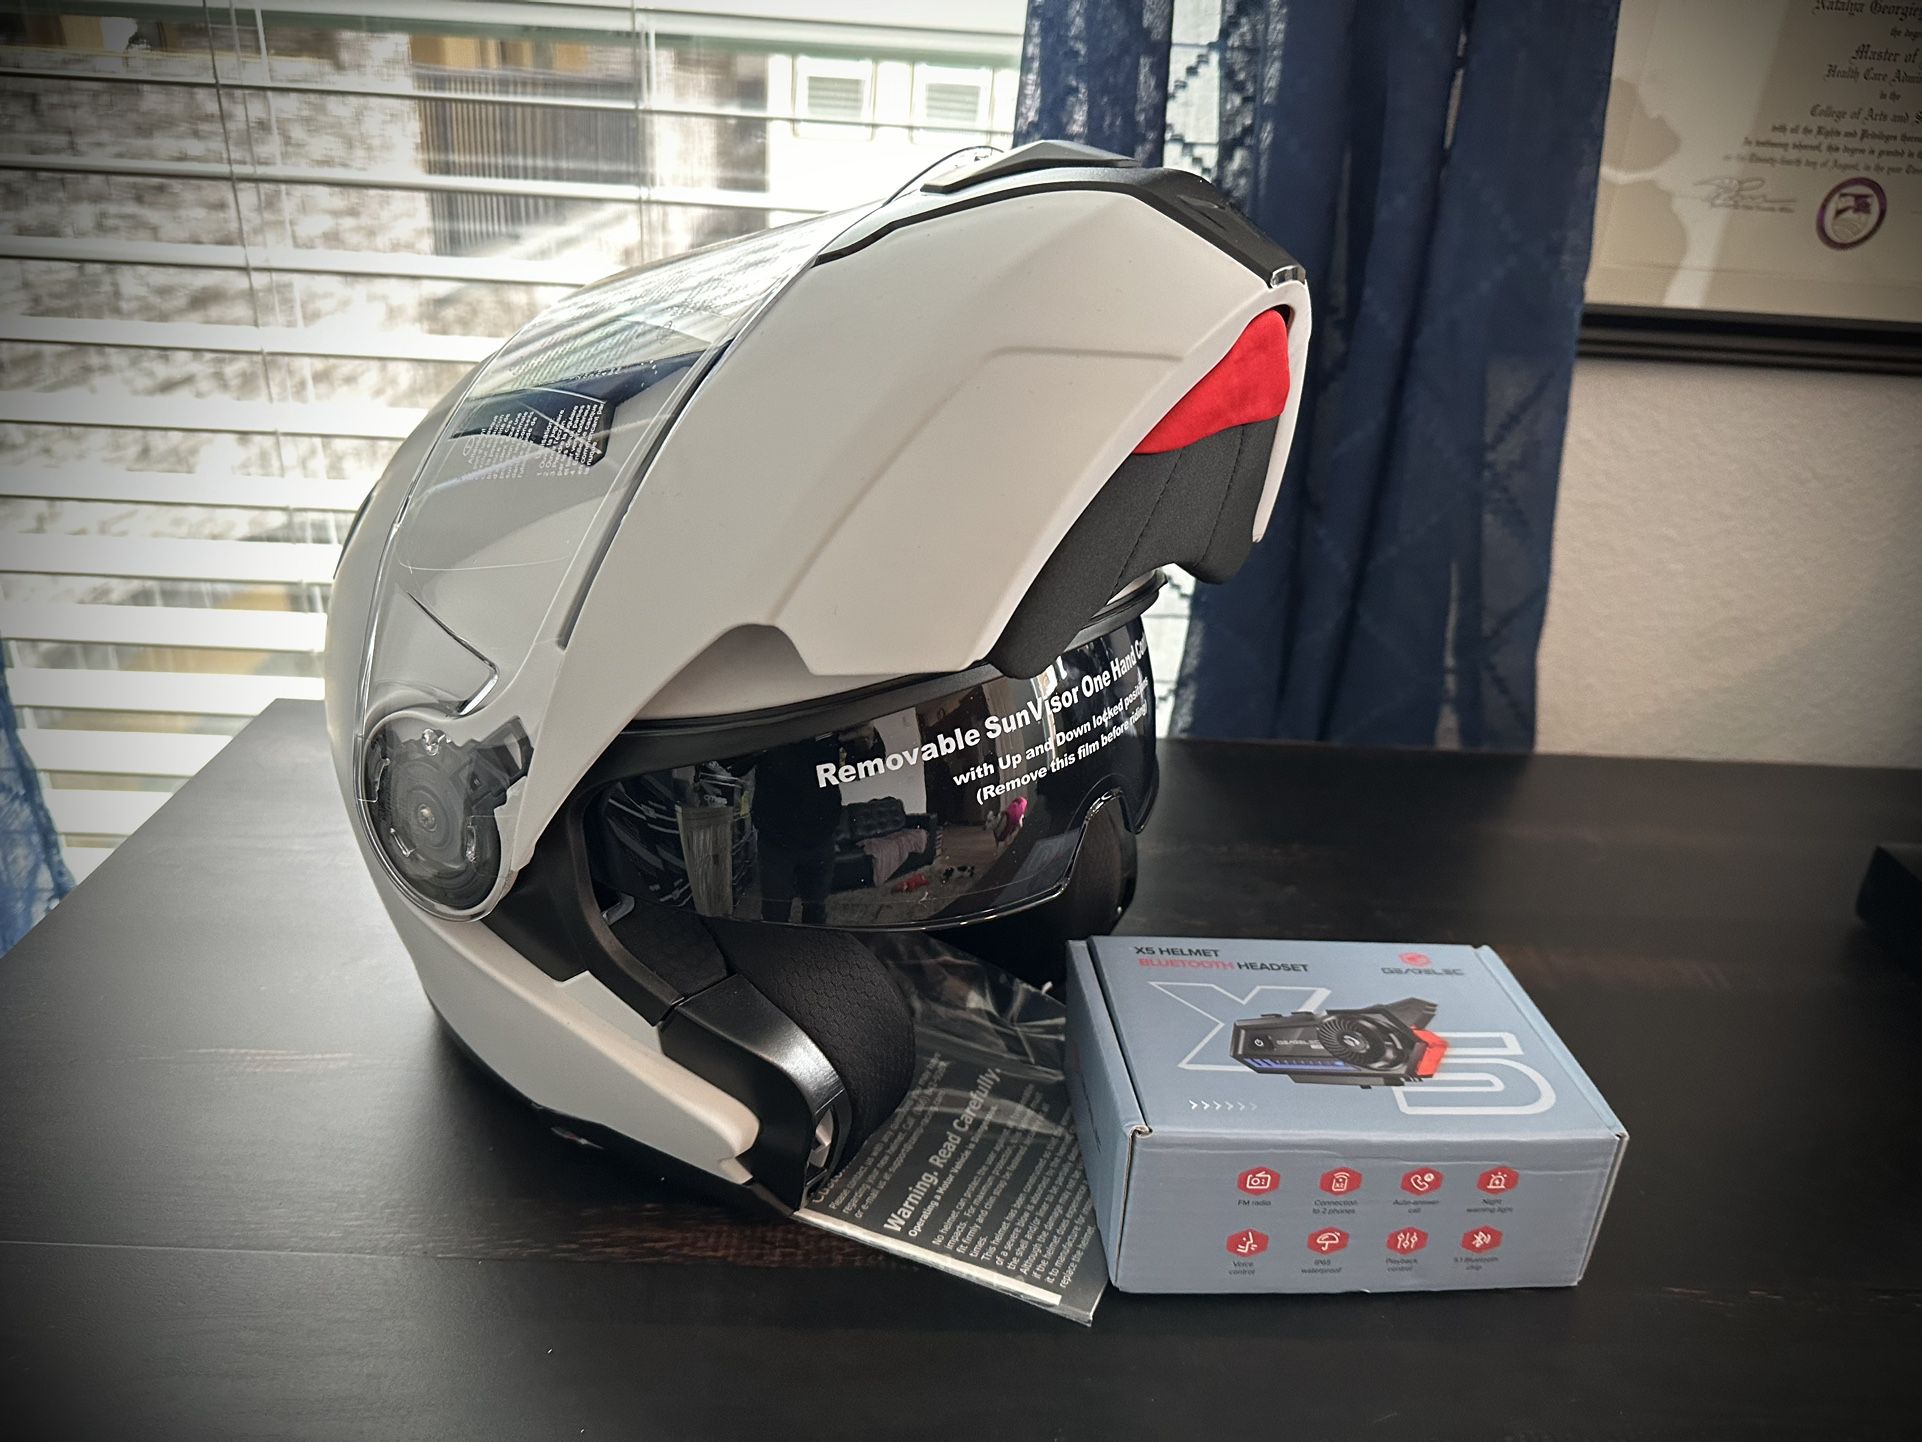 New Glossy White Modular Motorcycle Helmet with Bluetooth size Extra Large